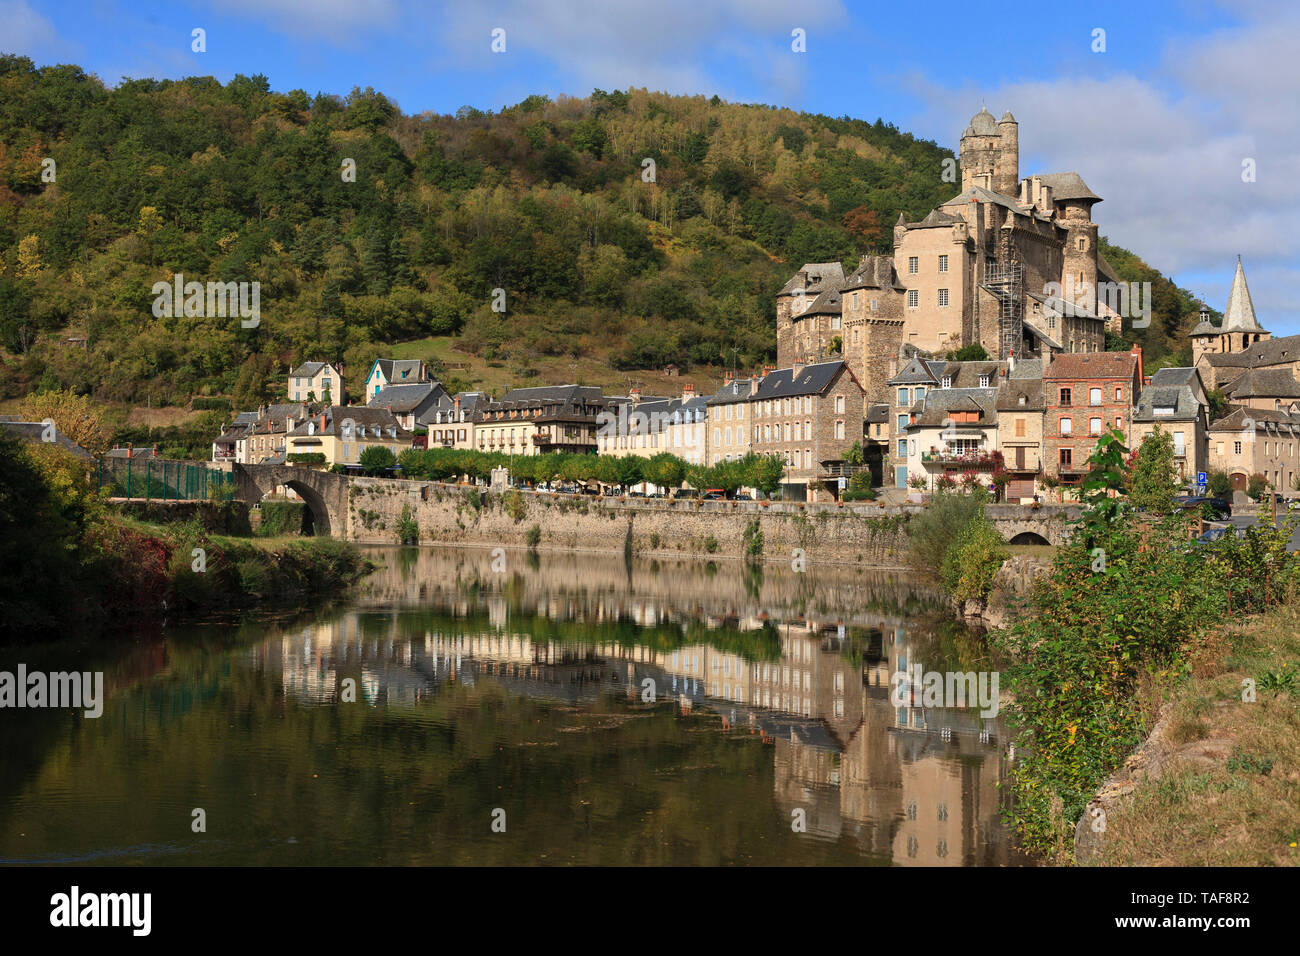 Estain listed as one of the most beautiful villages in France, Aveyron, France Stock Photo